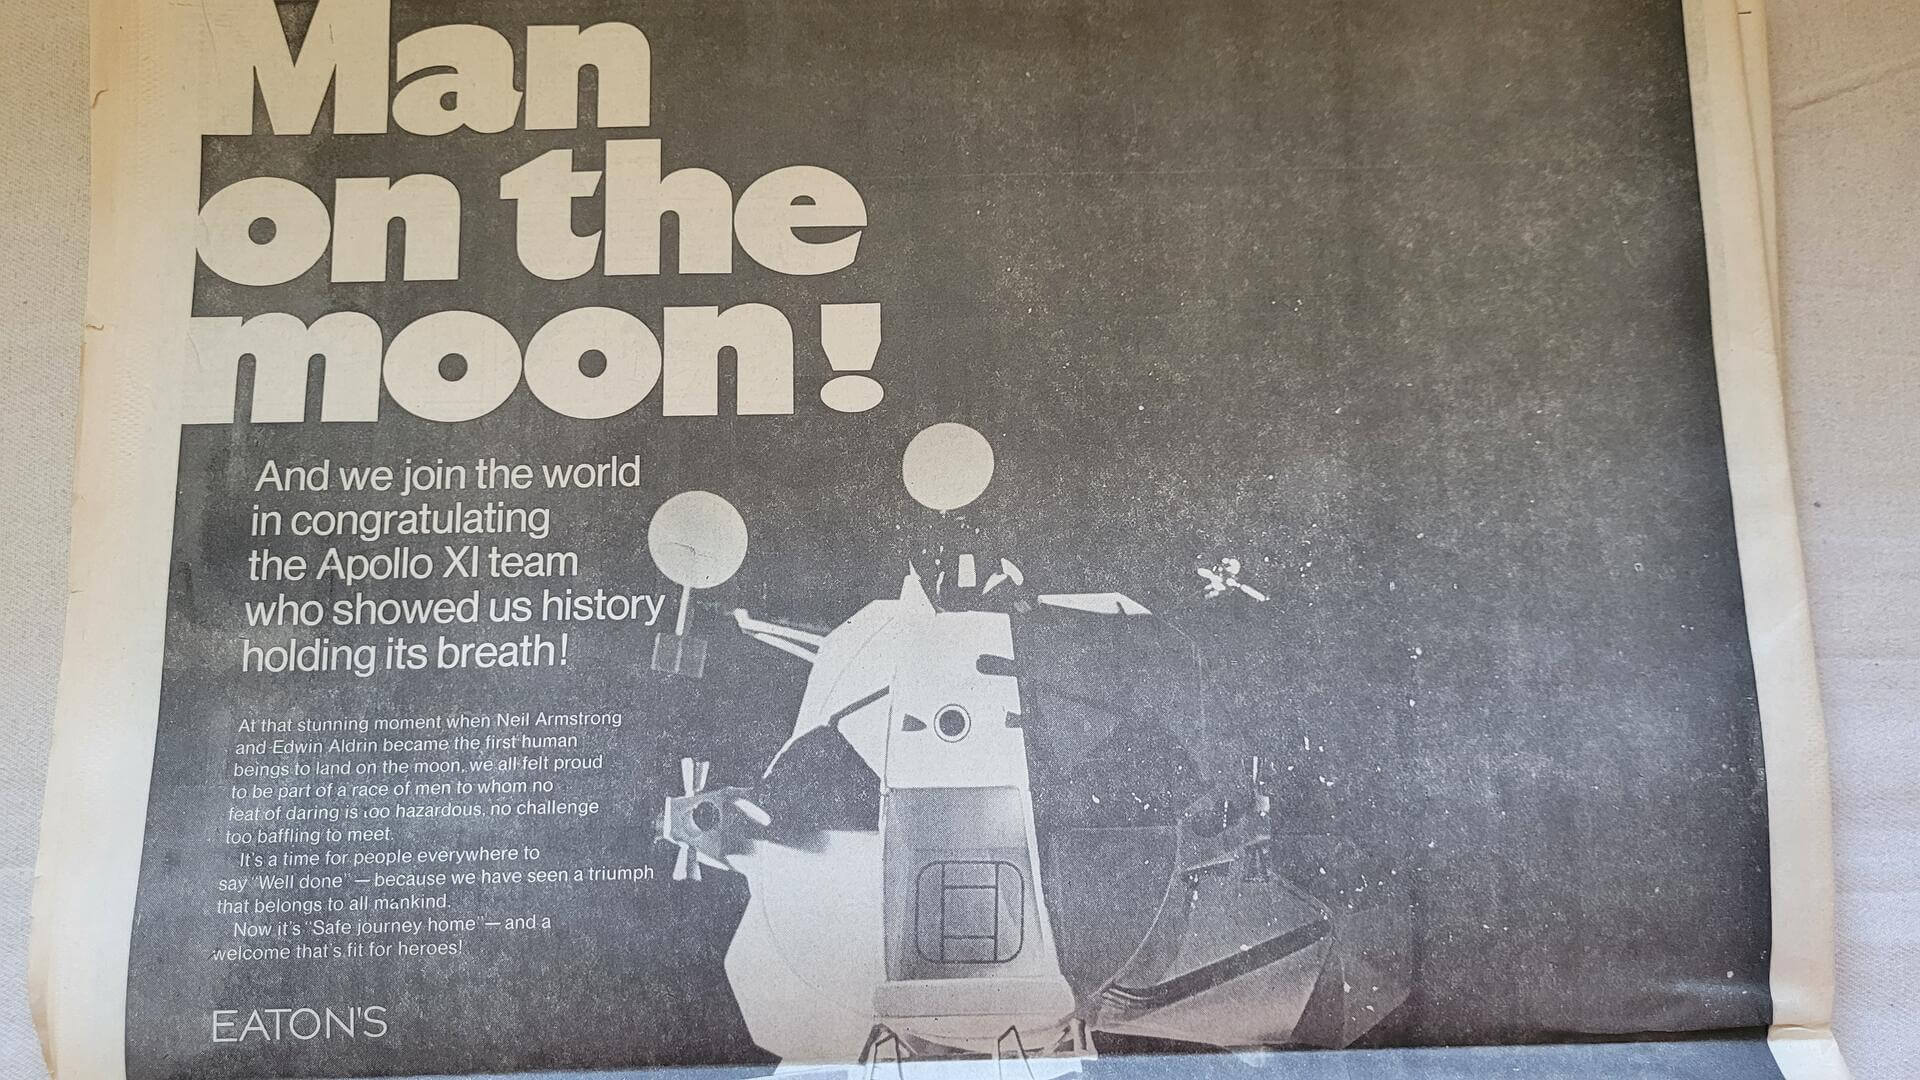 Rare Globe and Mail July 21 1969 Man on Moon newspaper edition delivered to Toronto's Old City Hall. Vintage Canadian scientific and historic events collectible newspaper and magazine Canadiana